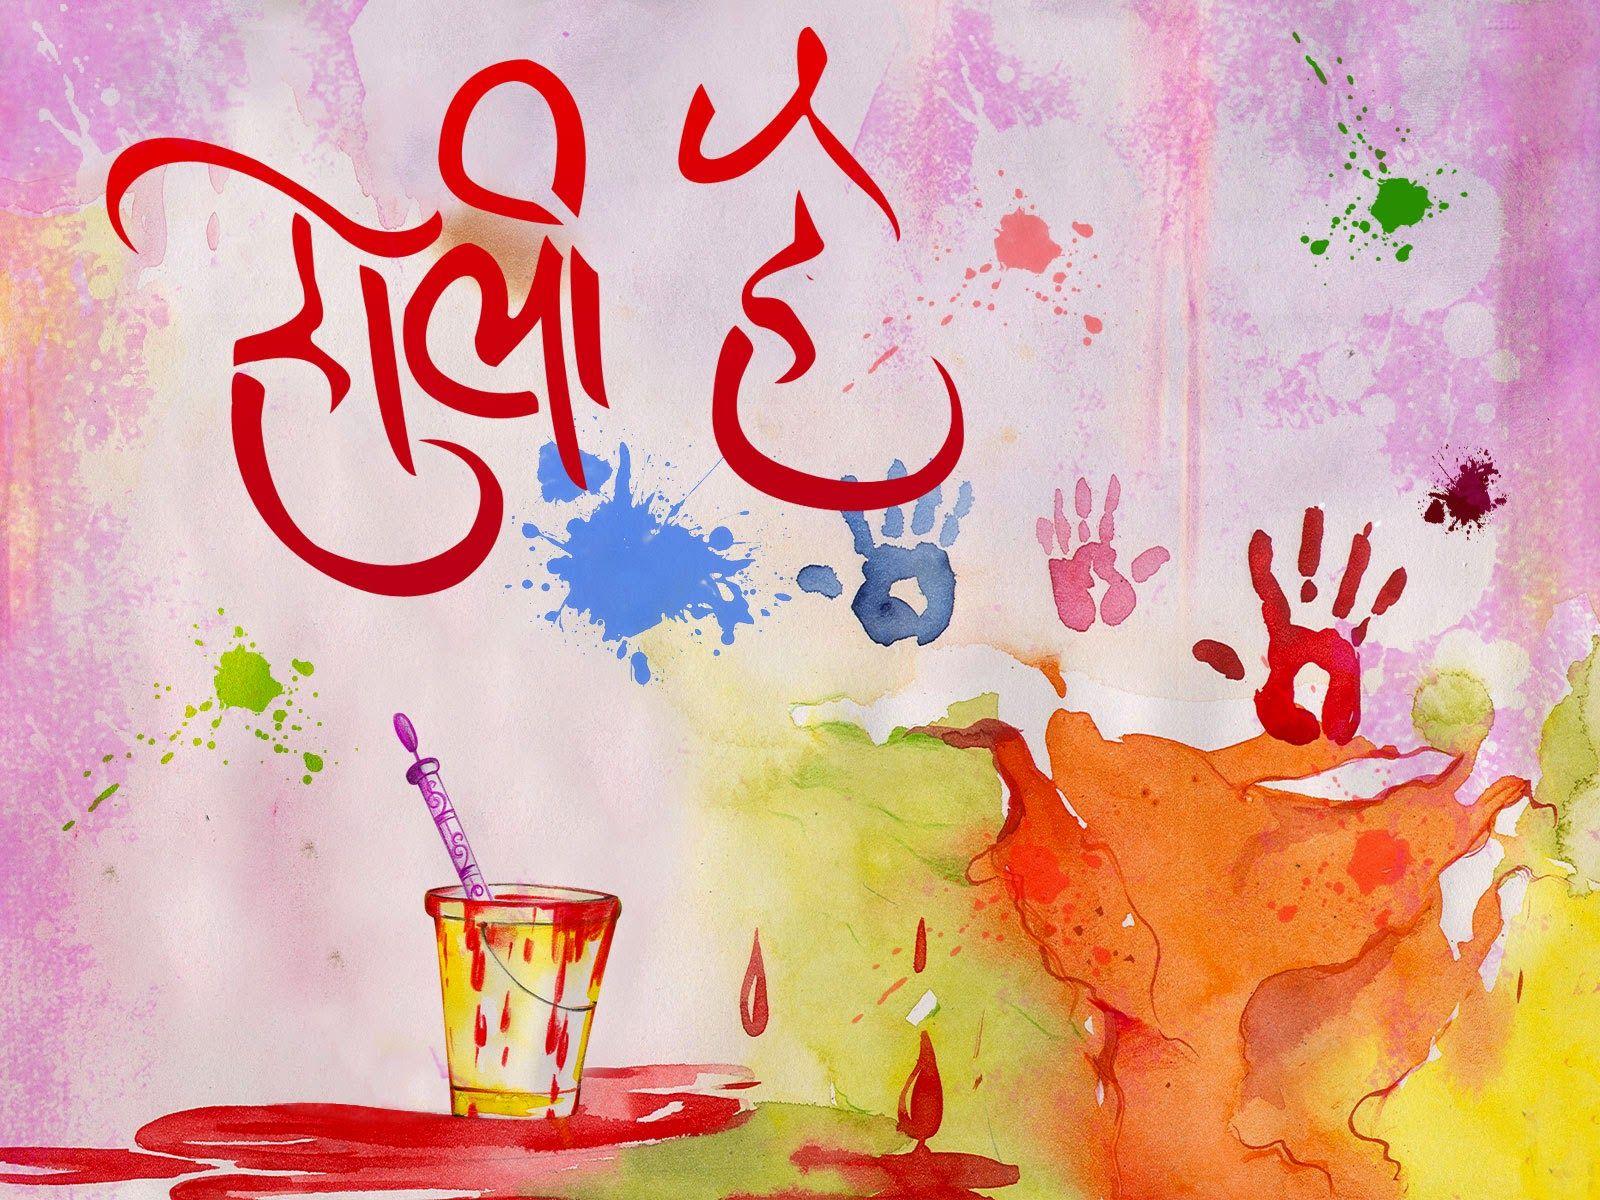 latest}} Happy Holi 2018 Image, Greetings, Picture, Wall Papers